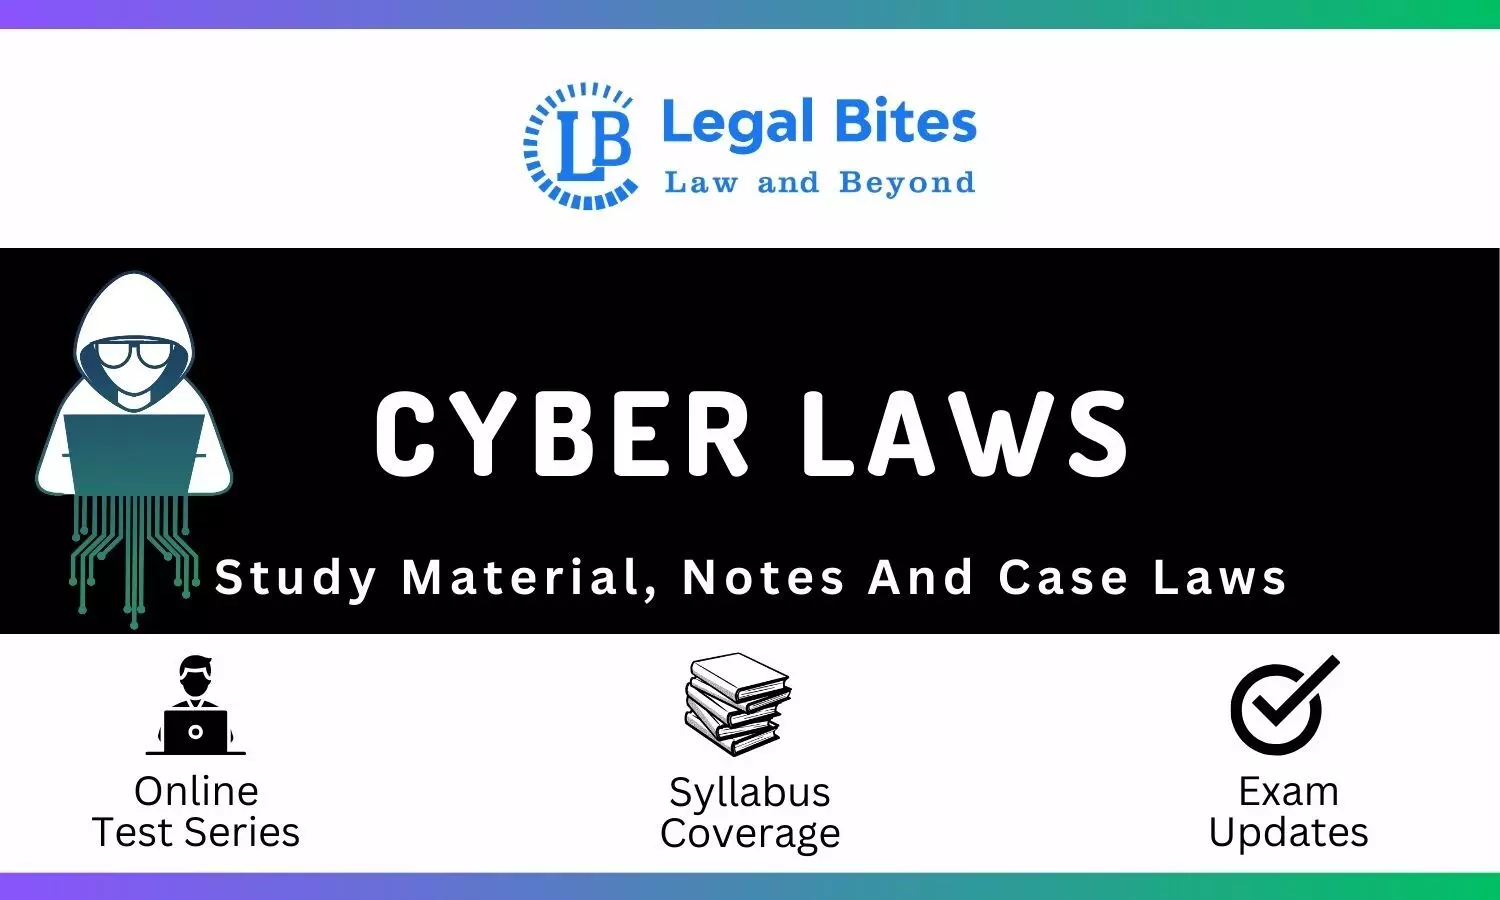 Cyber Law - Notes, Case Laws And Study Material